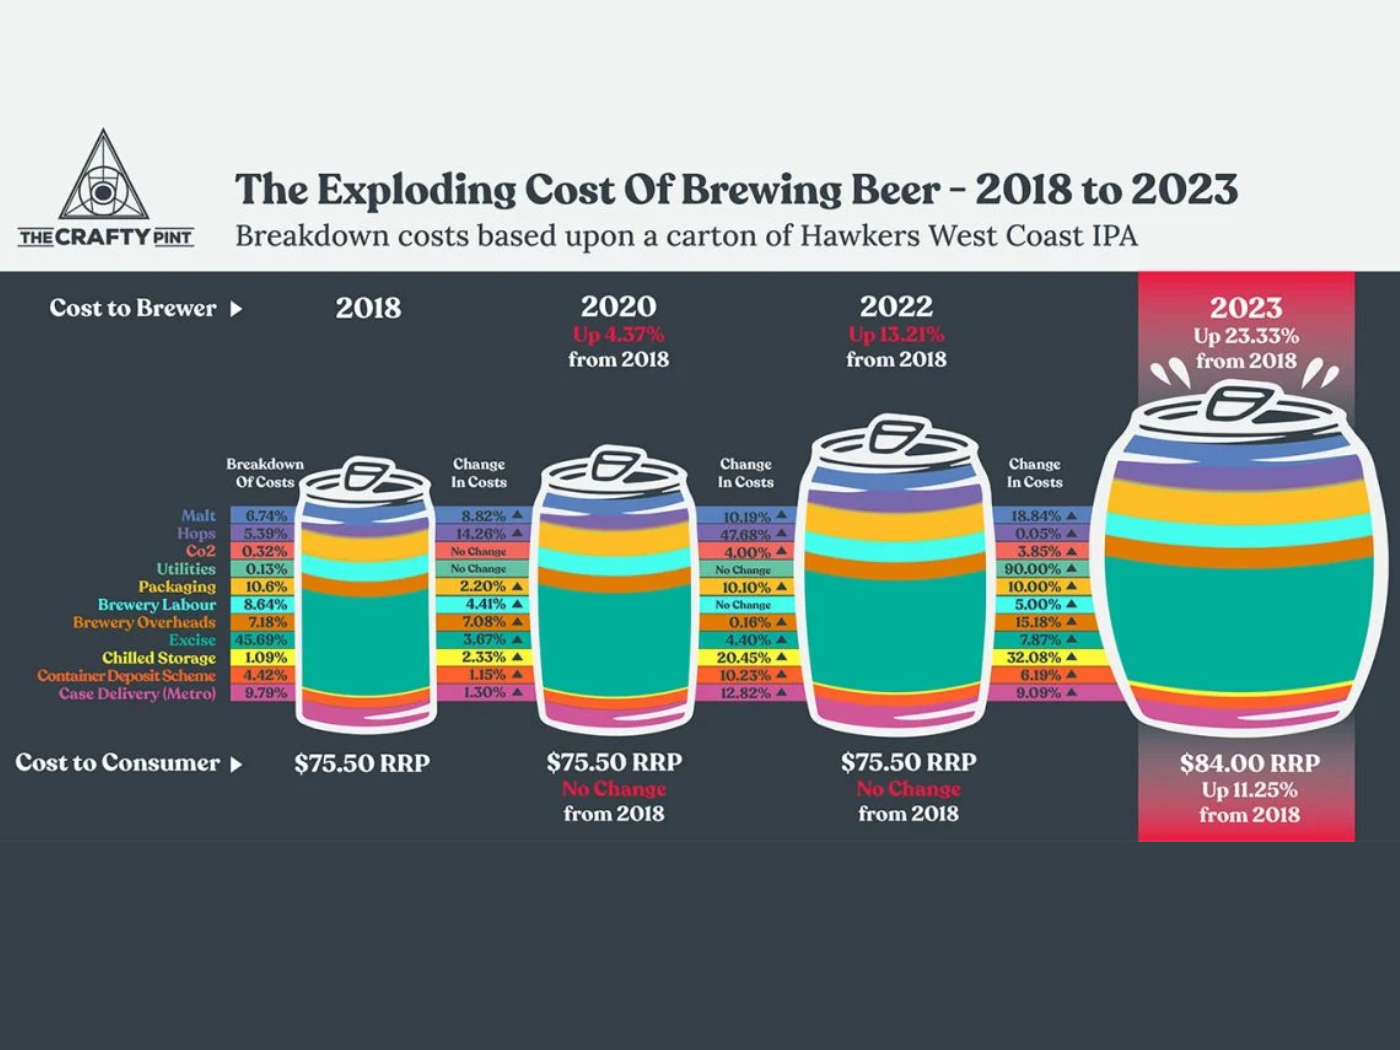 The Exploding Cost of Brewing Beer